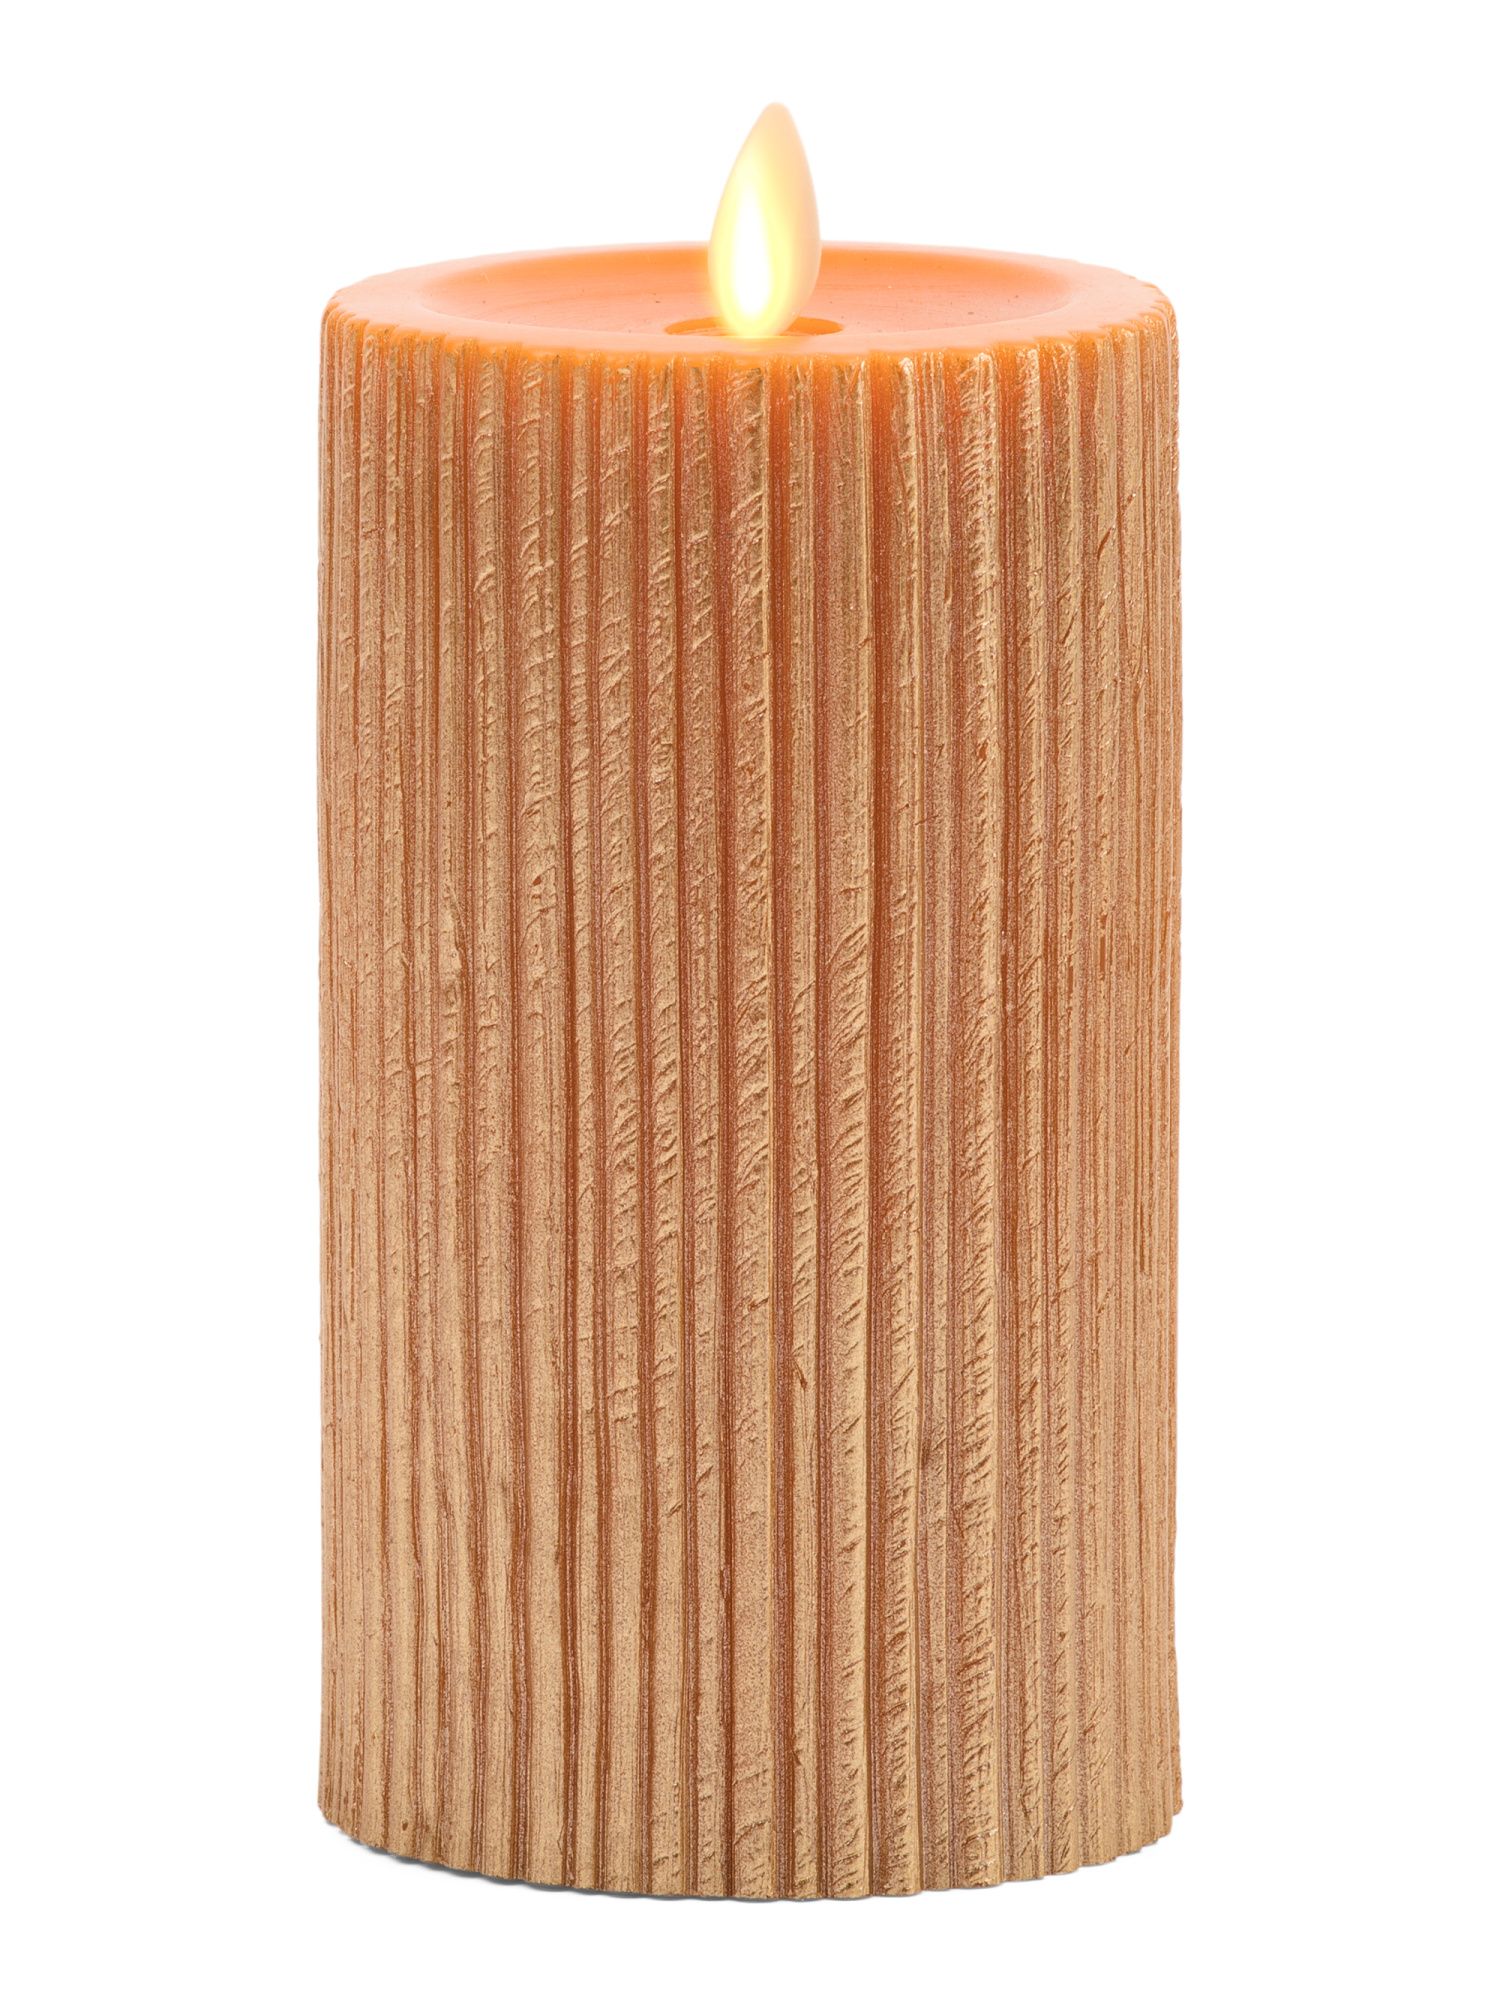 Textured Moving Flame Candle | TJ Maxx